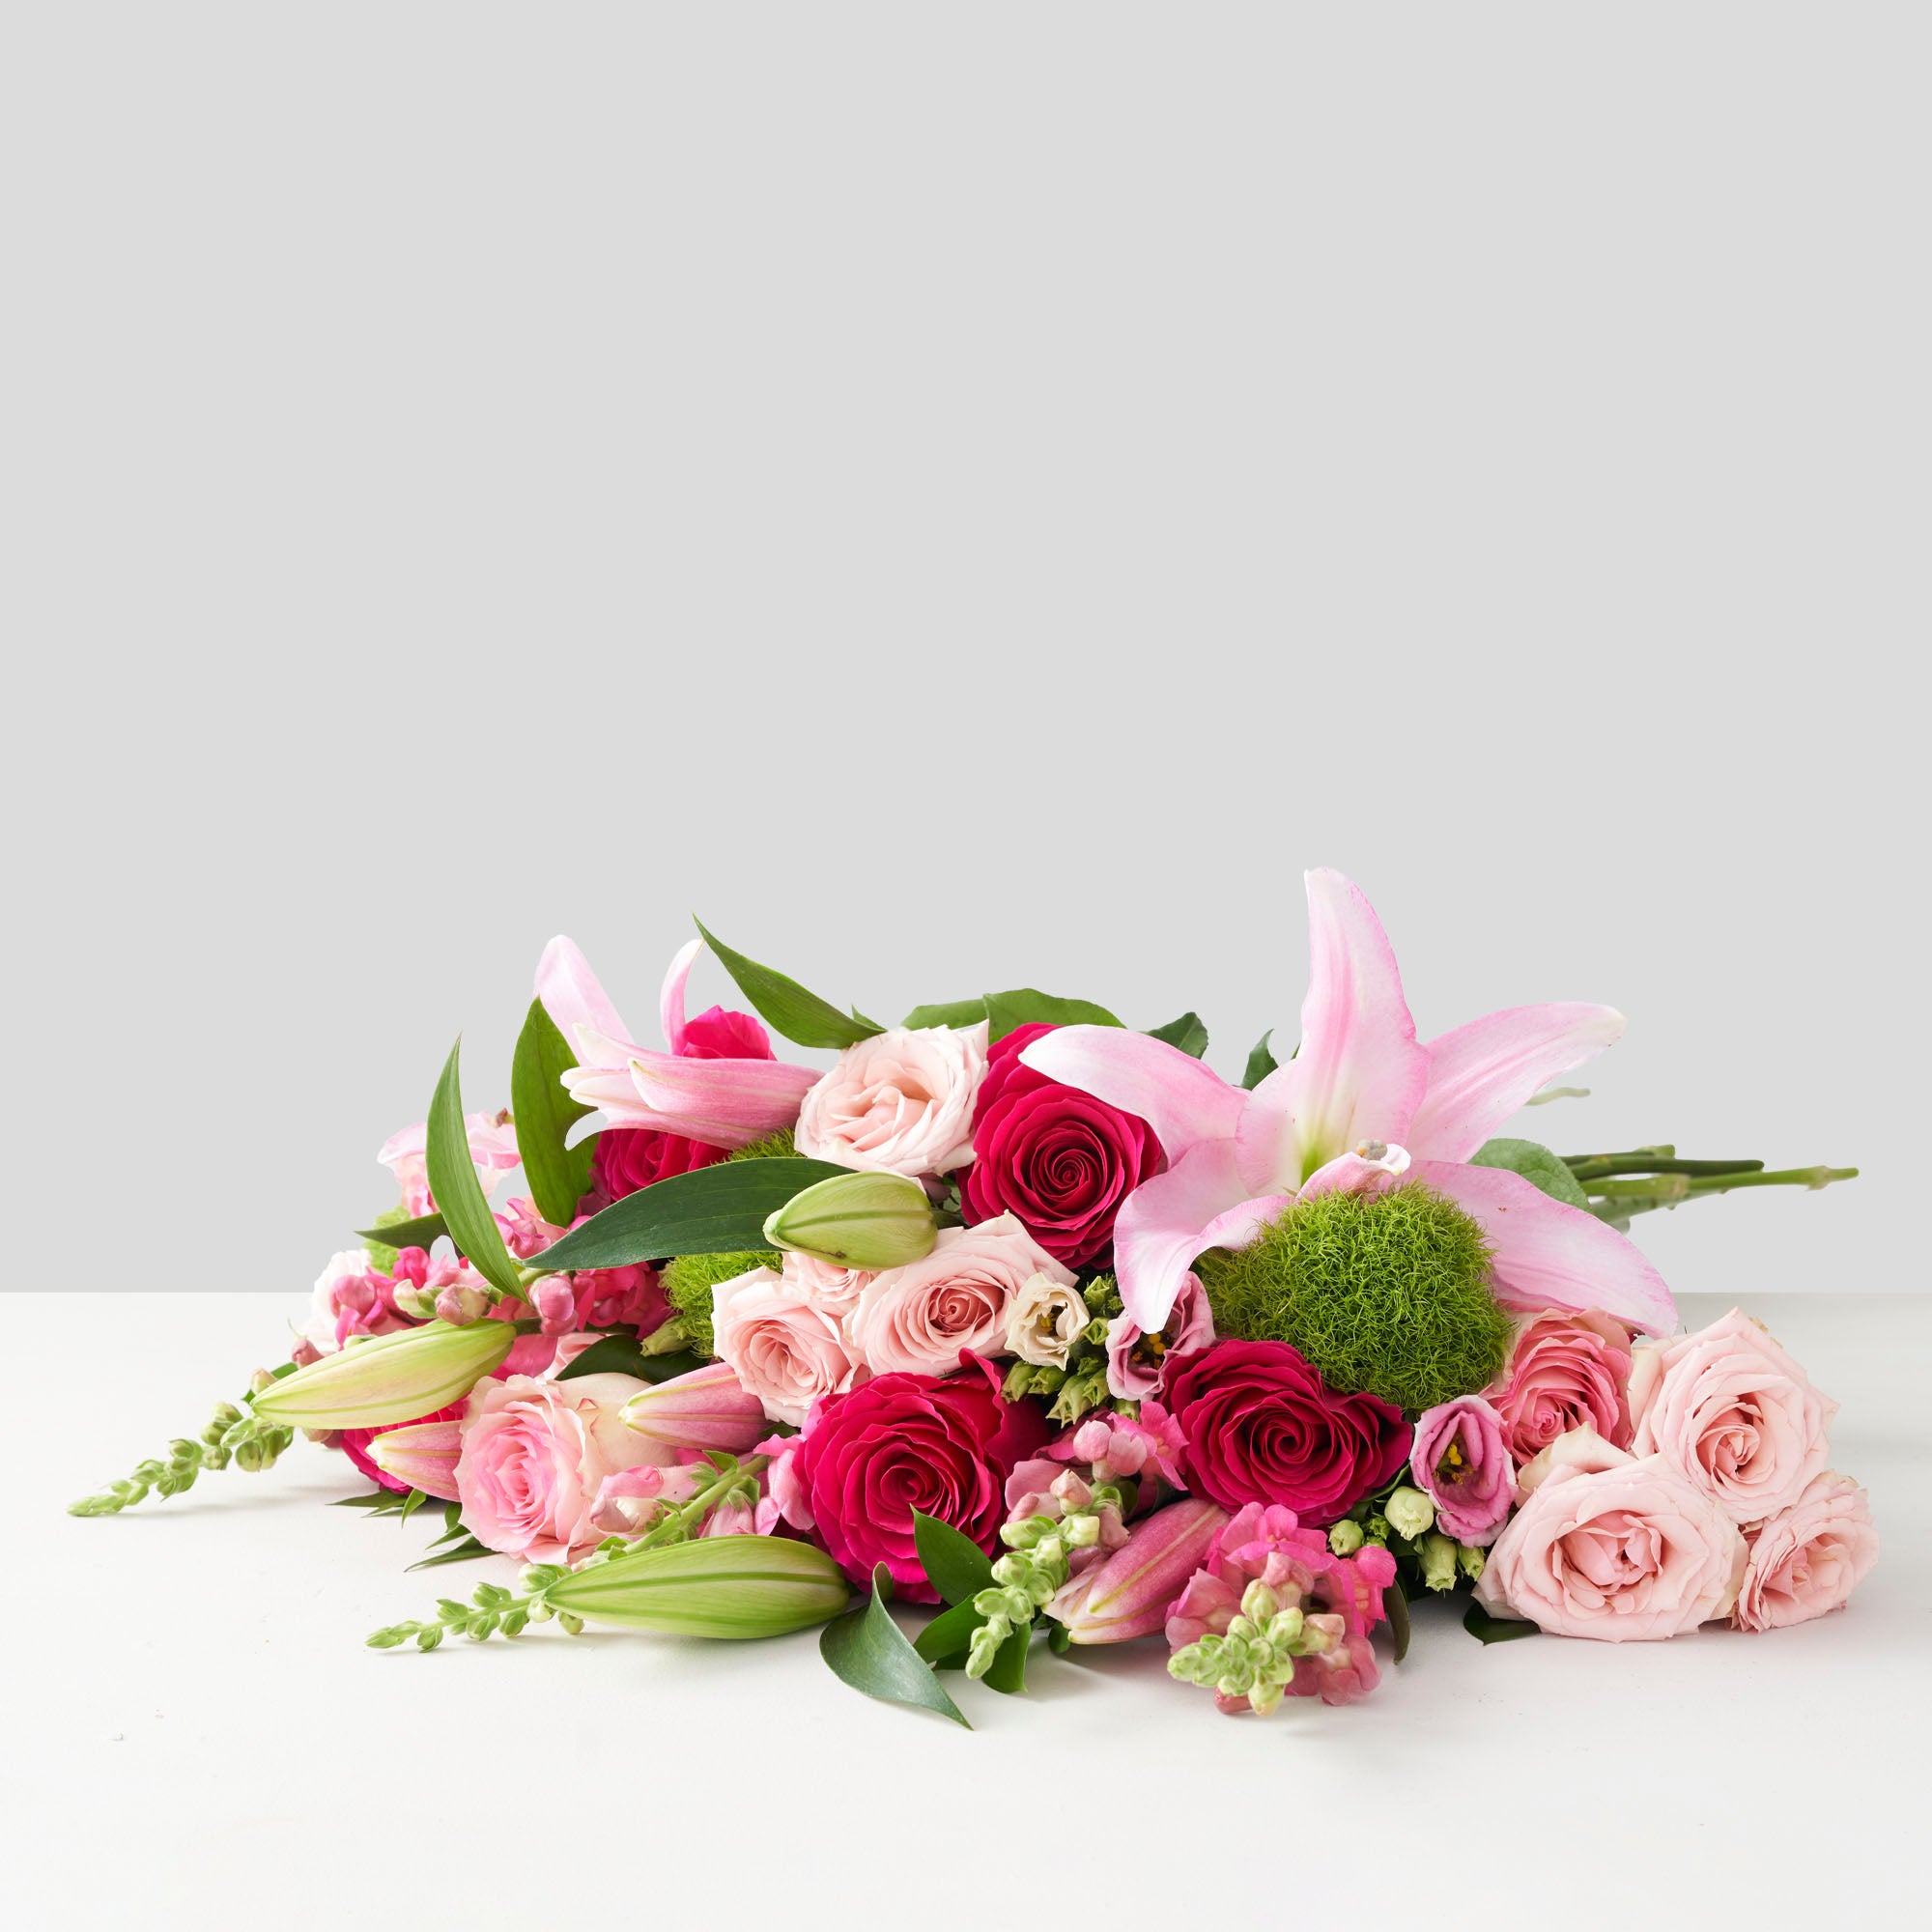 Bouquet of pink flowers, including roses, lilies, snapdragon, and lisianthus.